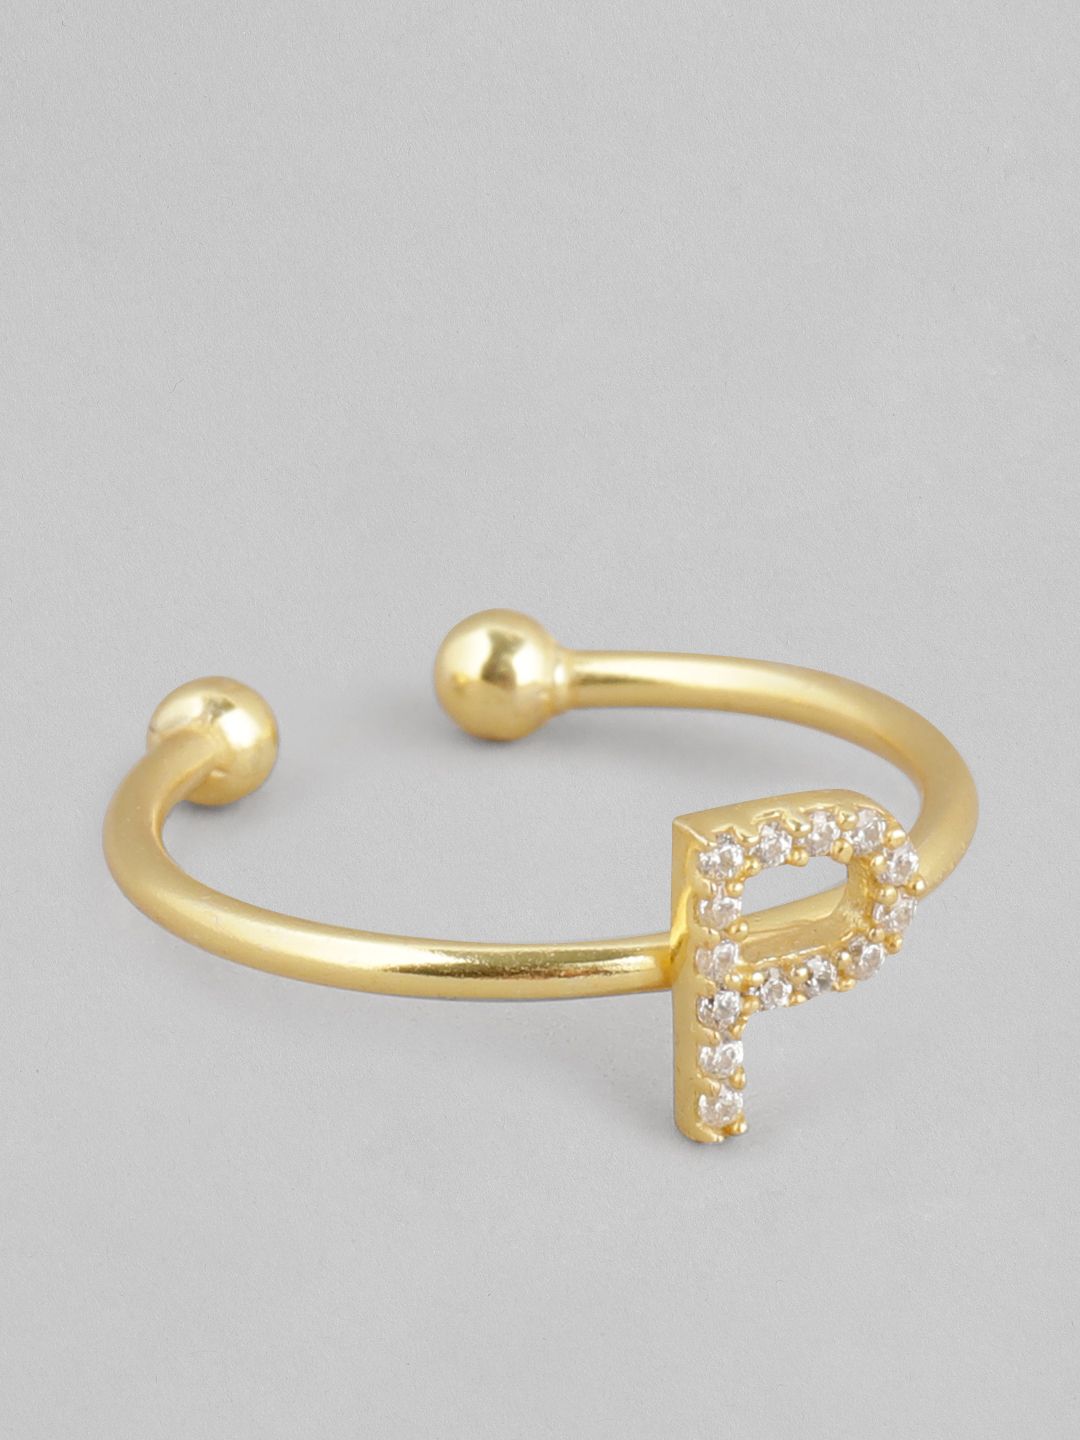 Carlton London Gold-Plated Letter P-Shaped Handcrafted CZ-Studded Adjustable Finger Ring Price in India